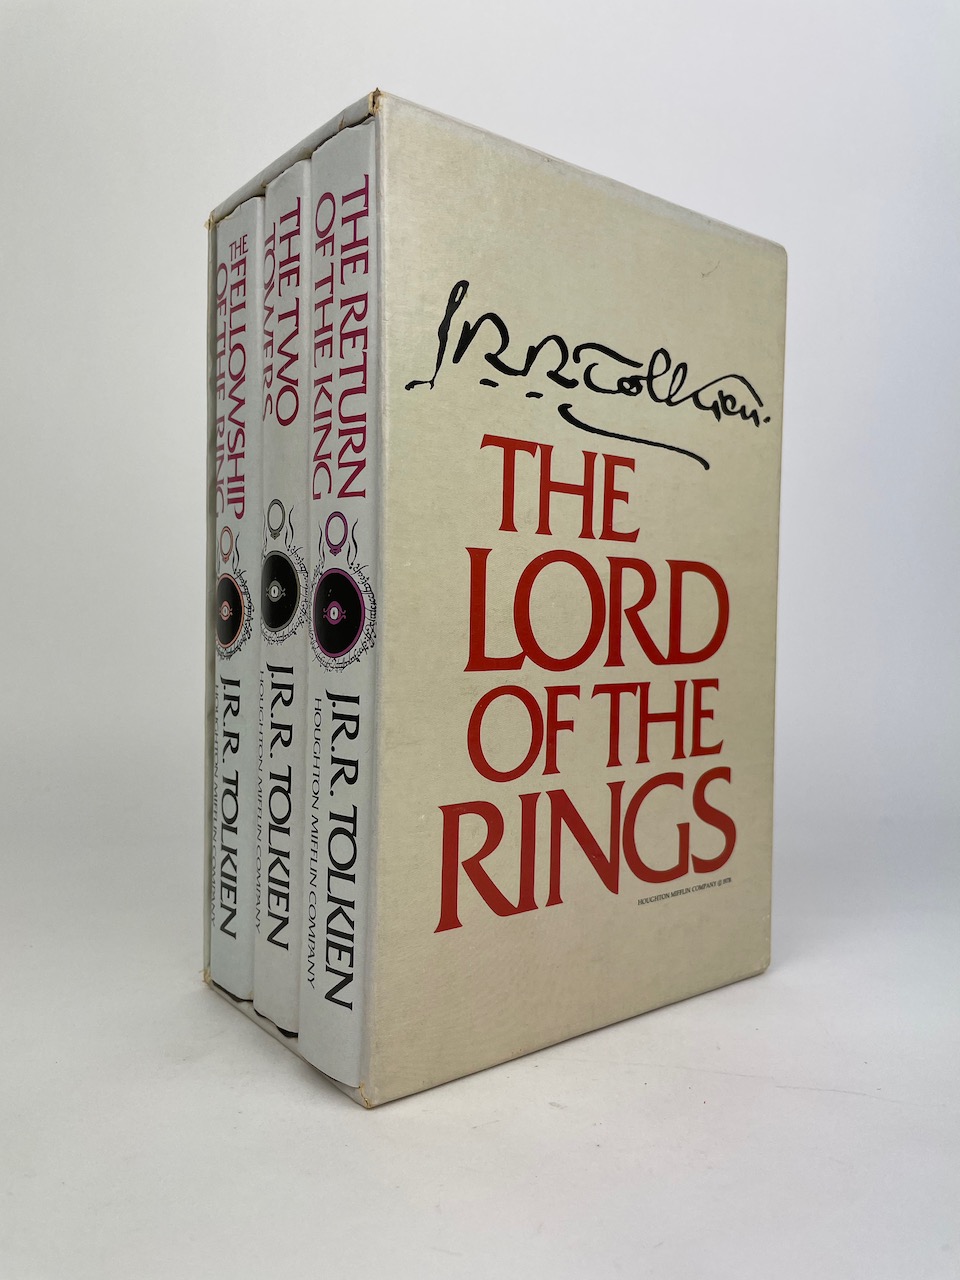 The Lord of the Rings JRR Tolkien Signature set from 1978, by Houghton Mifflin